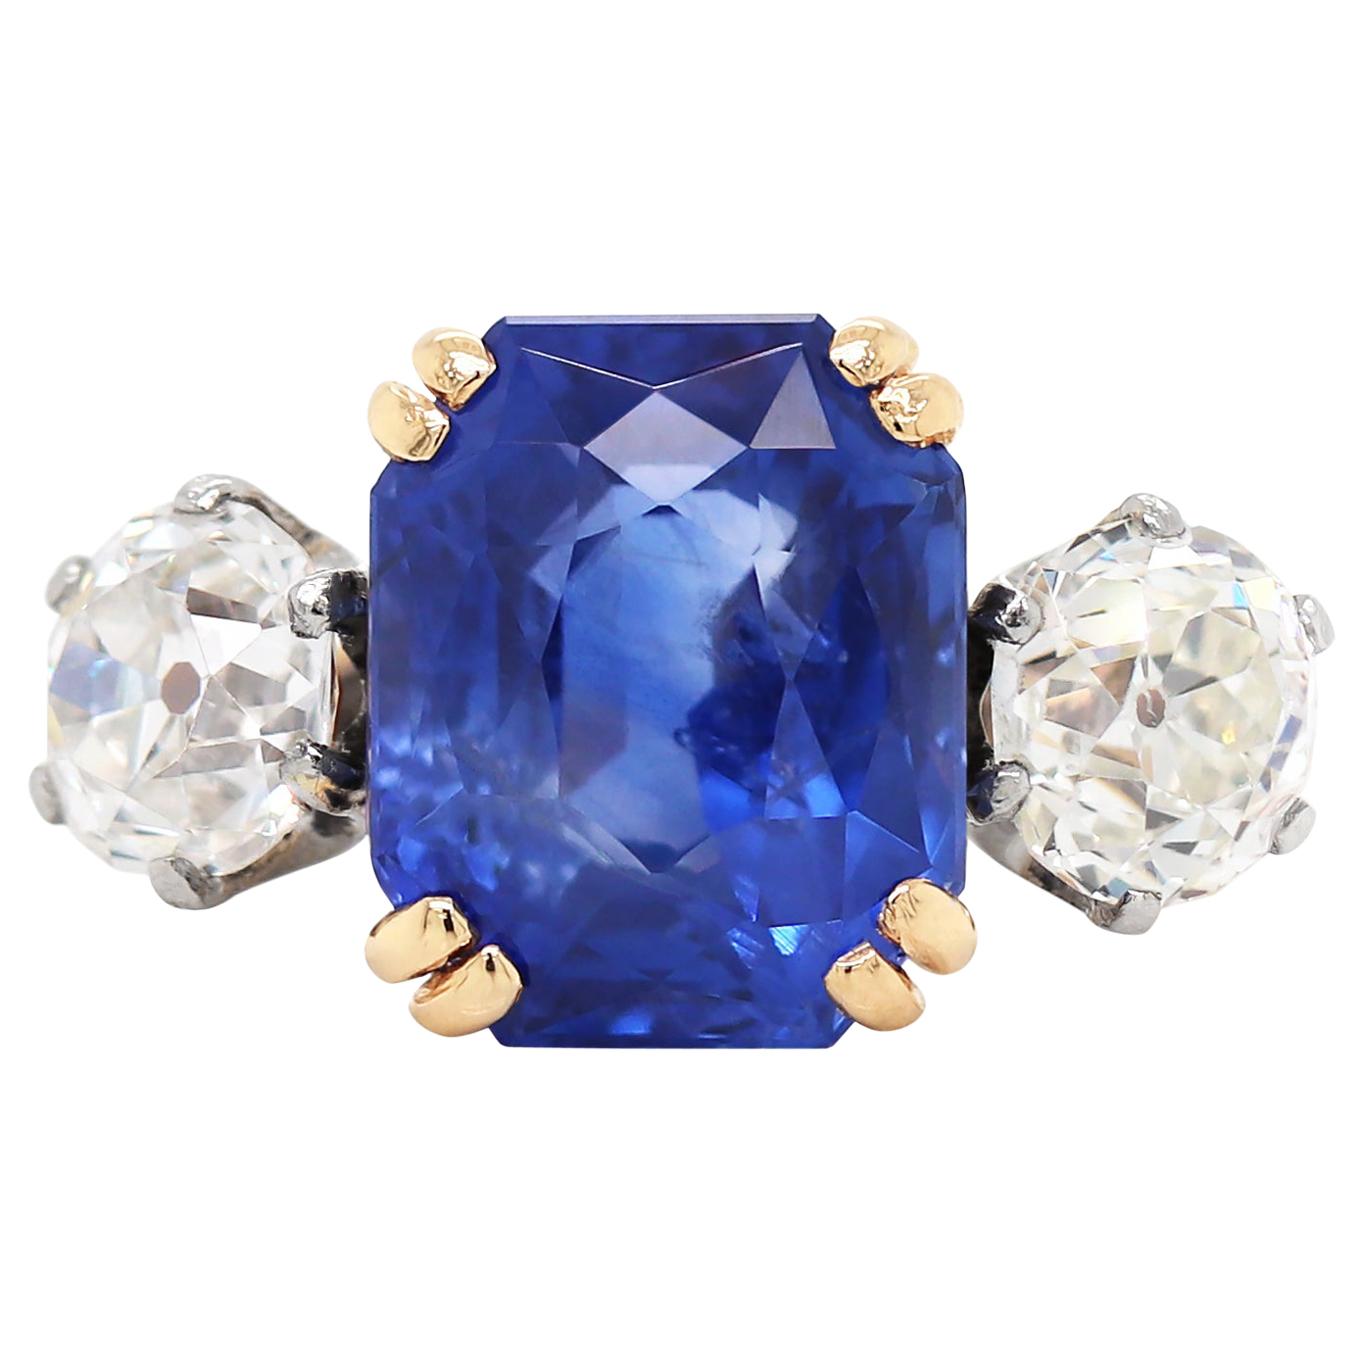 7.29 Carat Natural Unheated Sapphire and Old Cut Diamond Three-Stone Ring